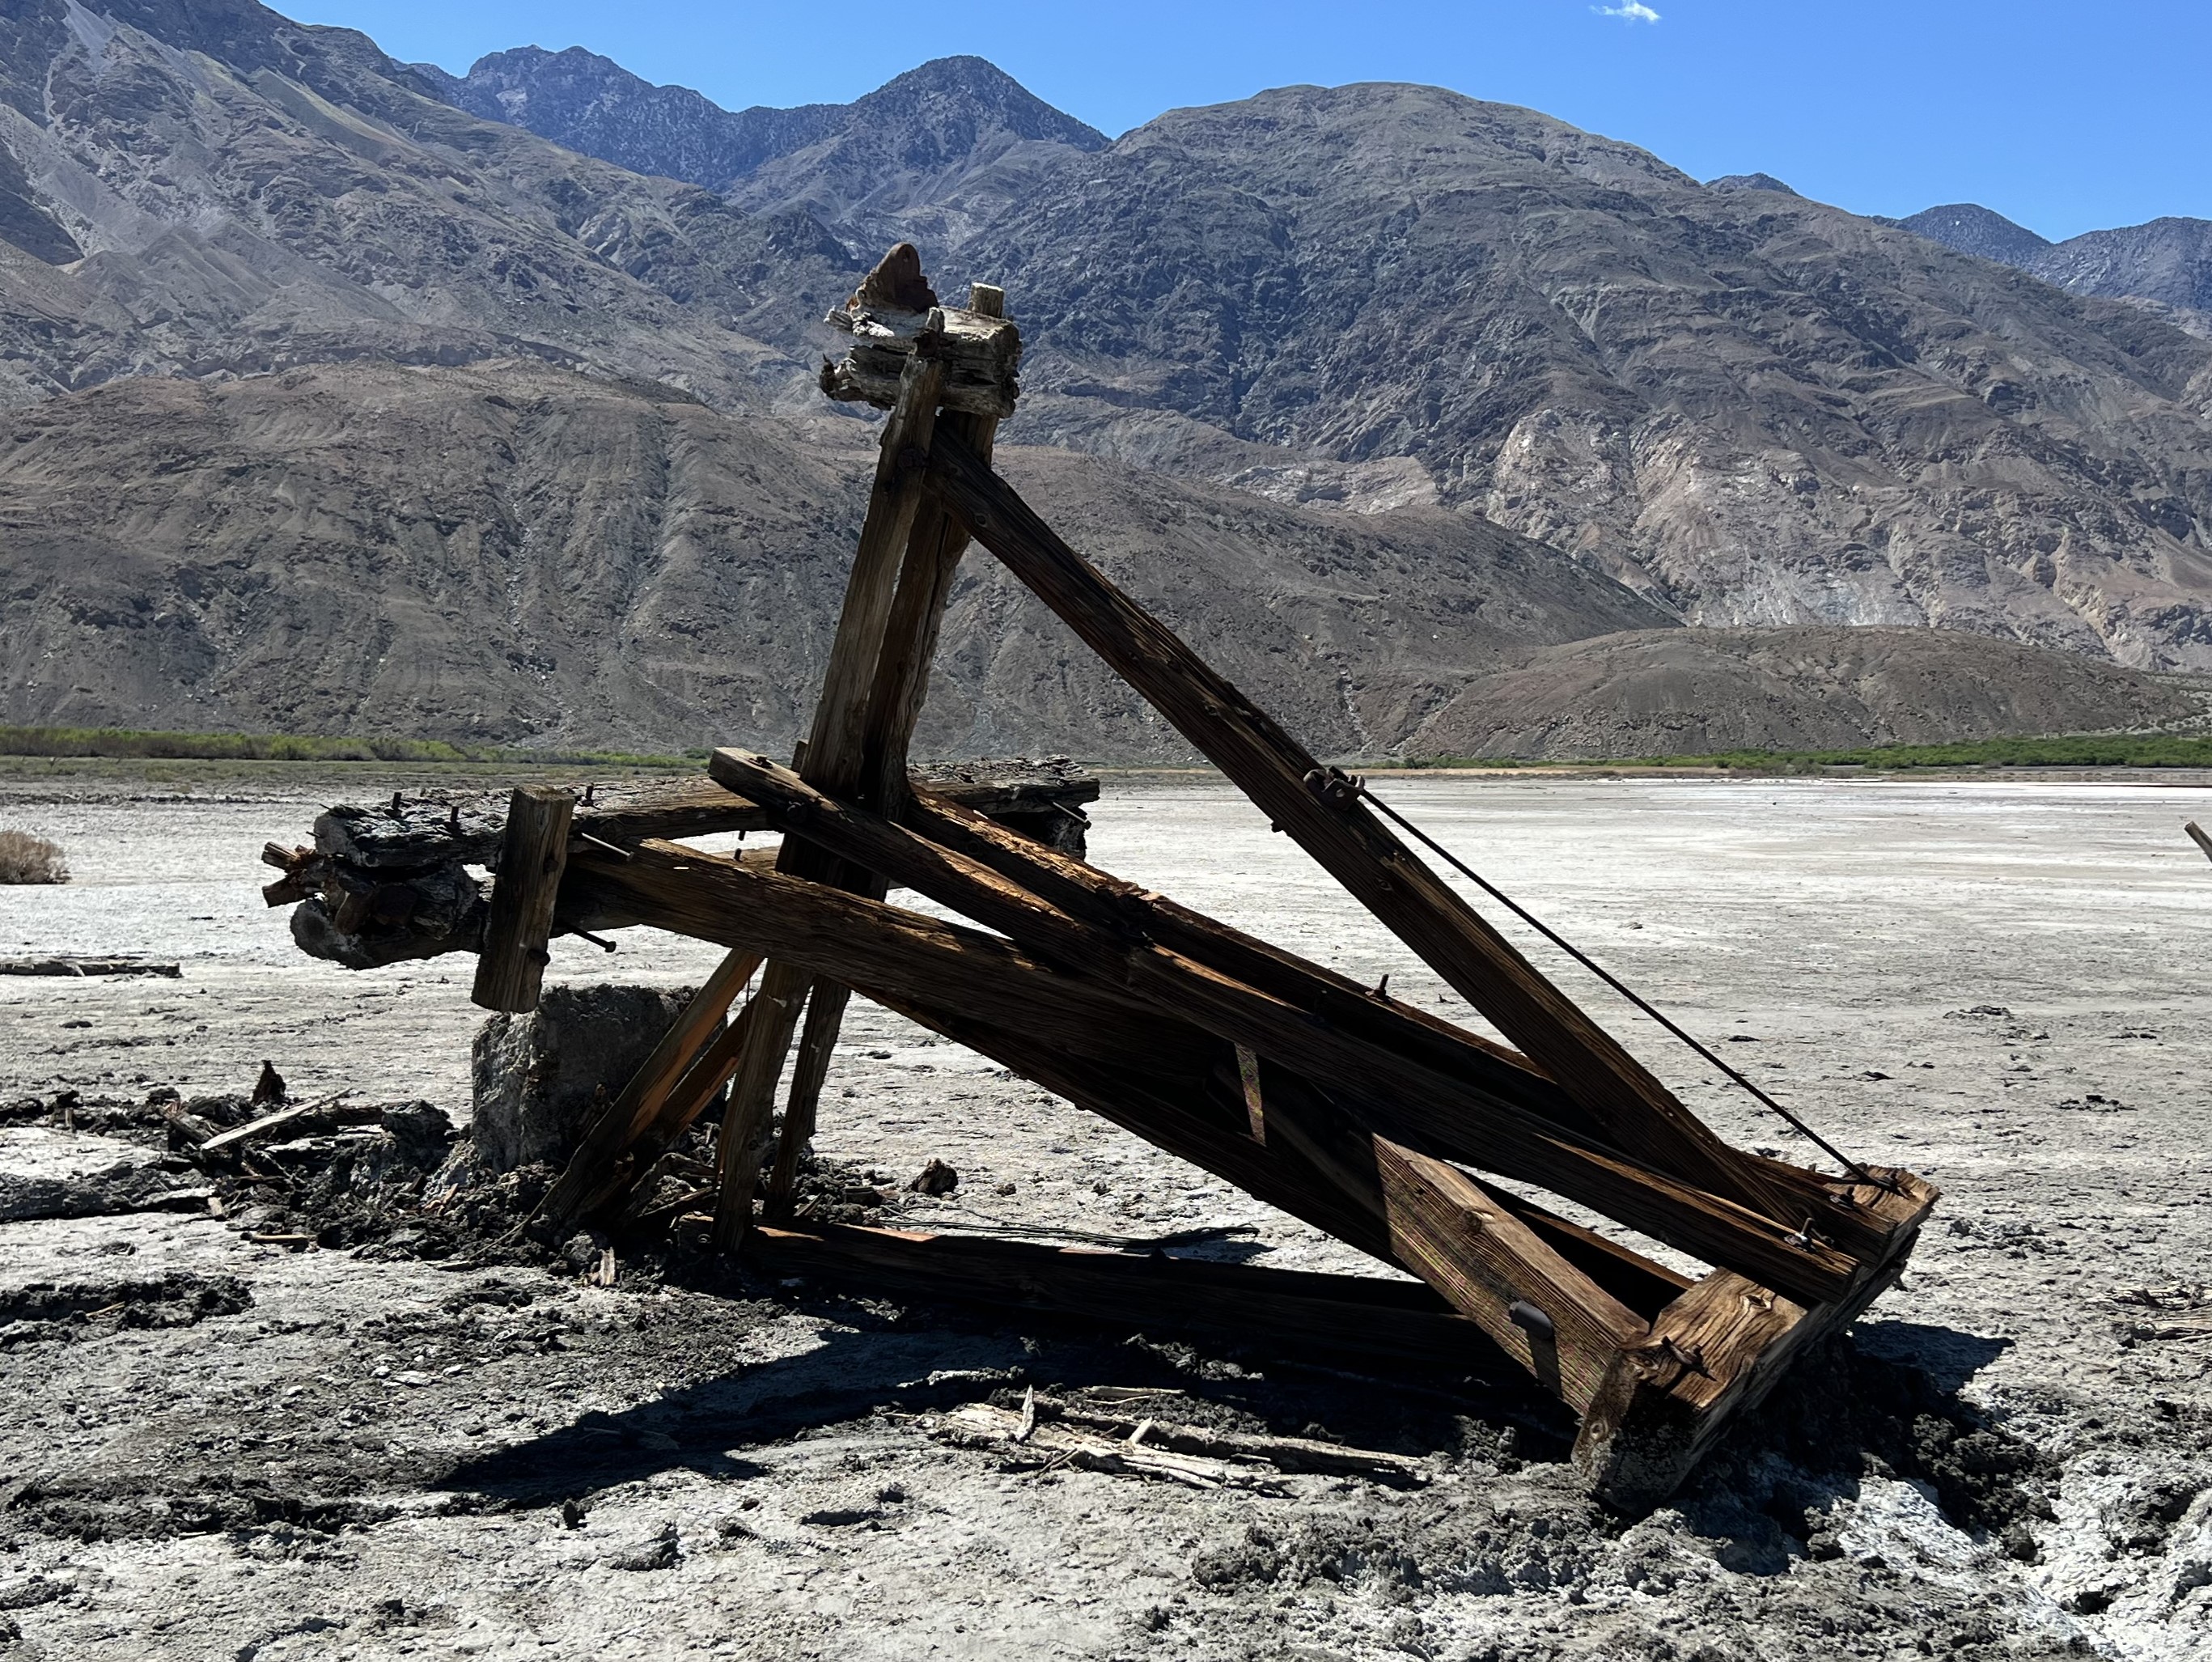 A wooden structure is toppled over on flat white ground. Dark mountains are in the background.